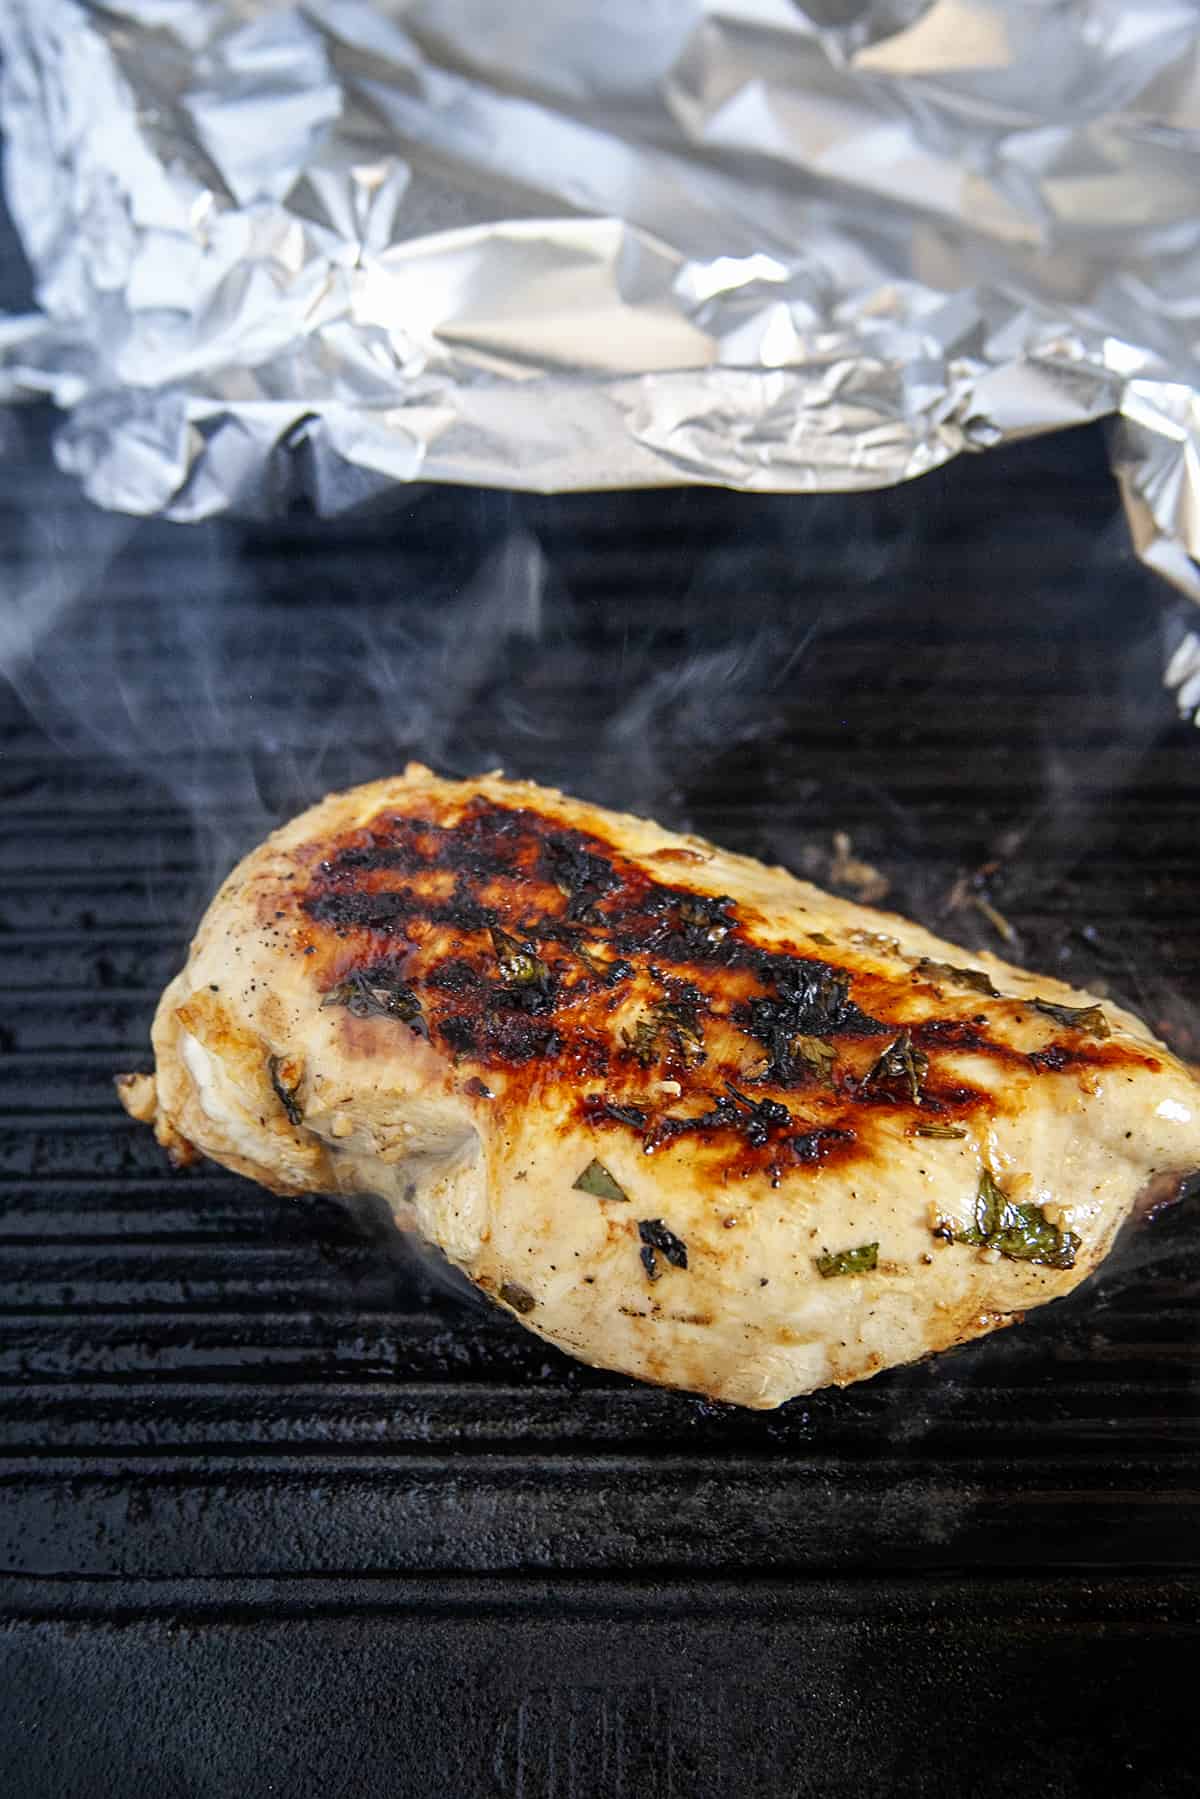 Chicken breast on the BBQ